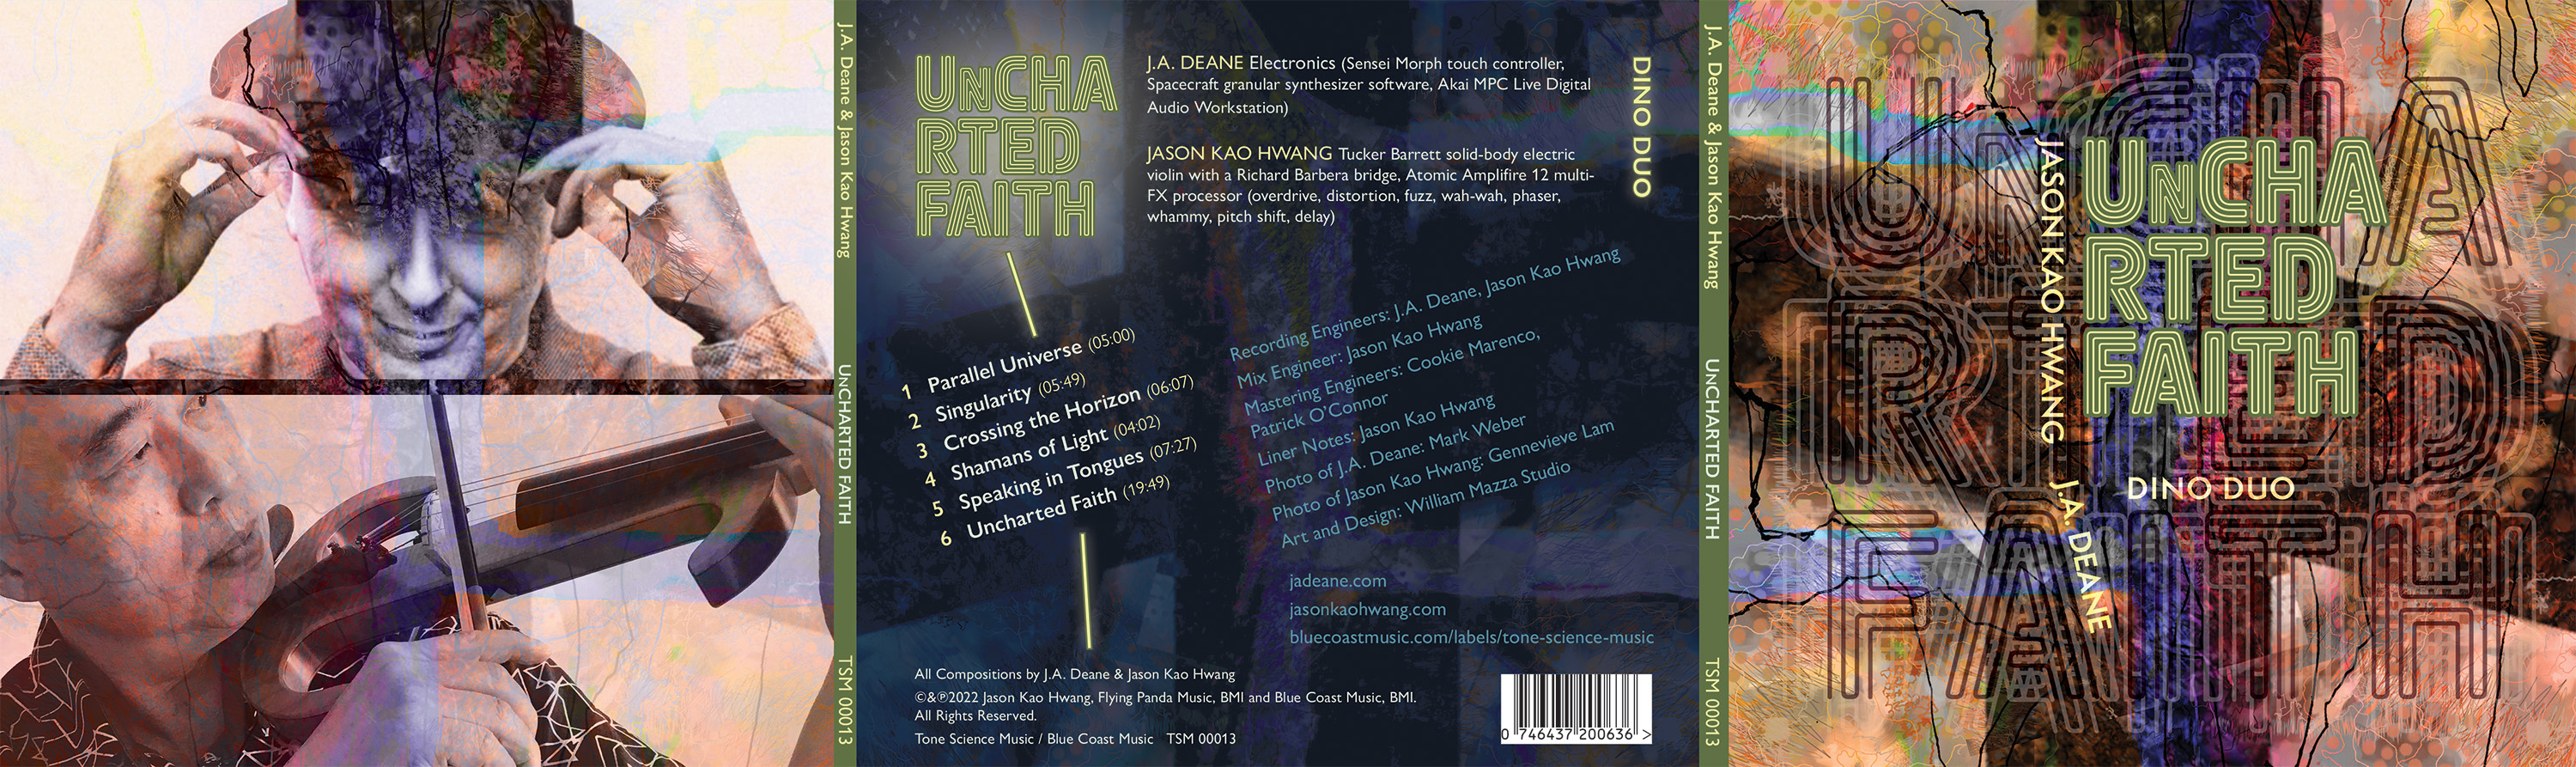 cd cover and outside panels Uncharted Faith by J.A.Deane and Jason Kao Hwang